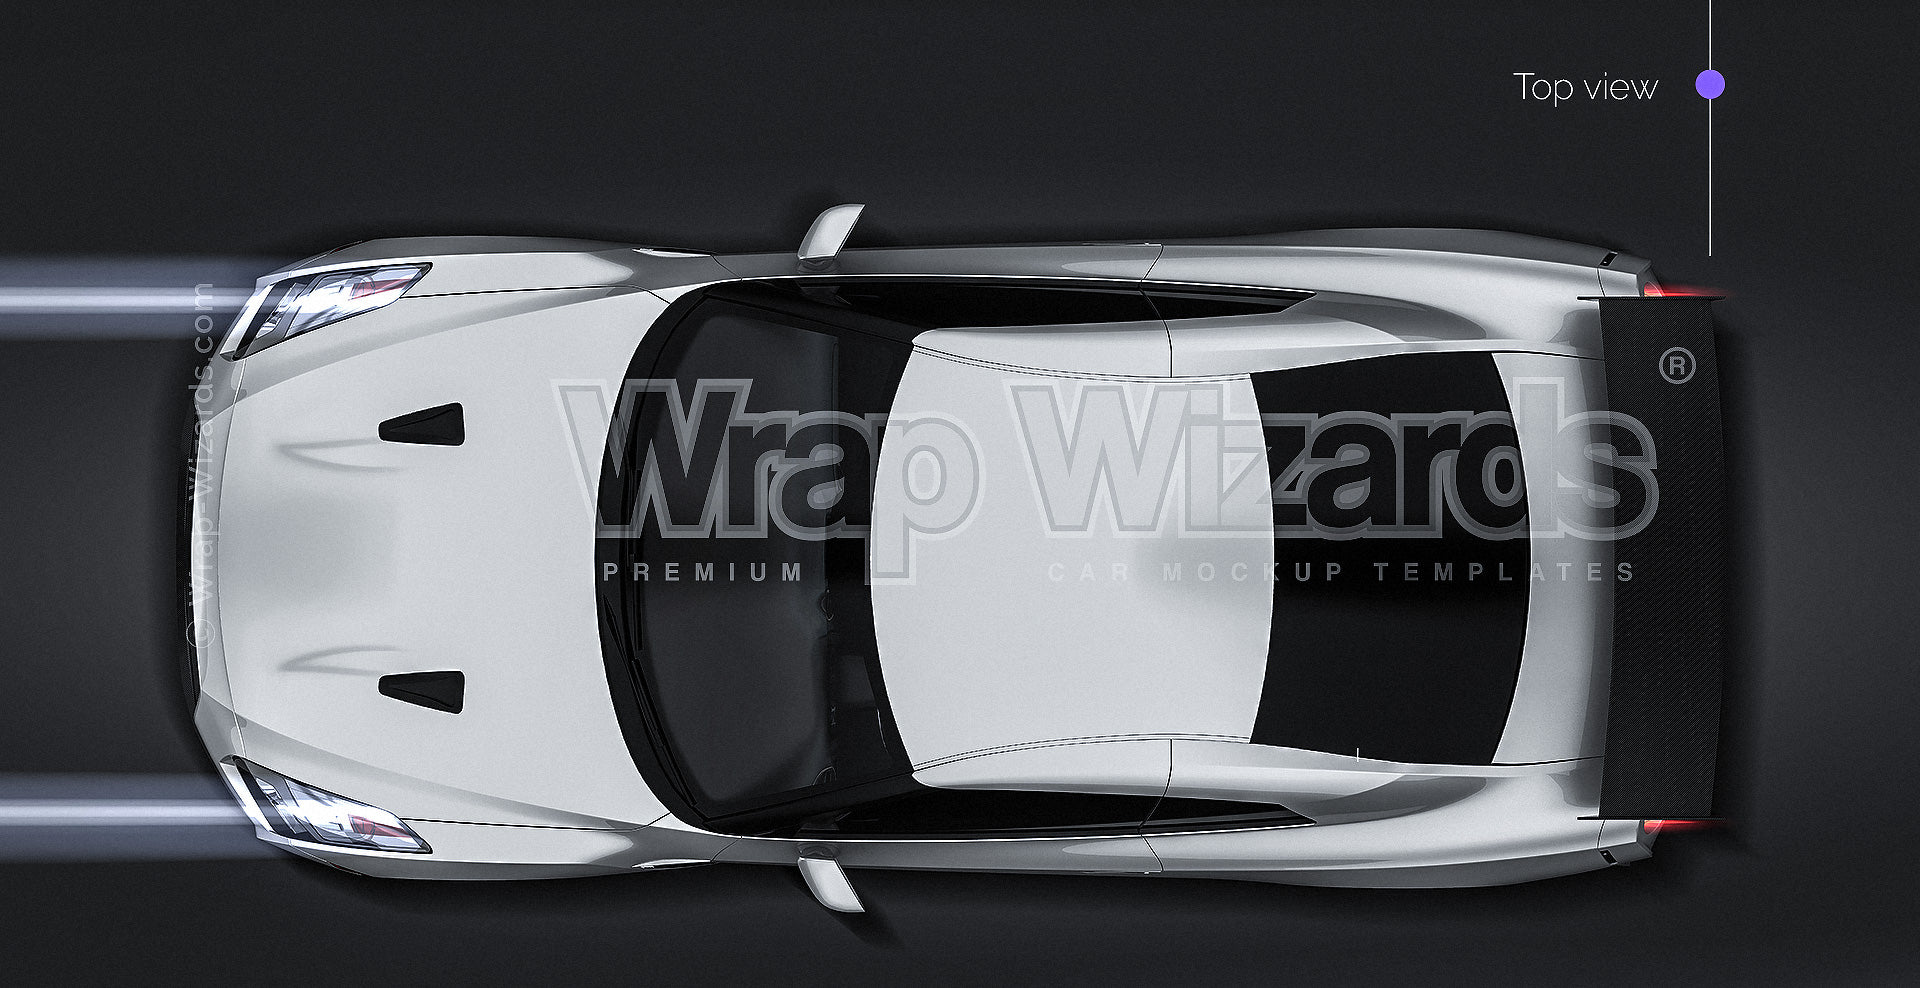 Nissan GT-R Nismo 2015 glossy finish - all sides Car Mockup Template.psd